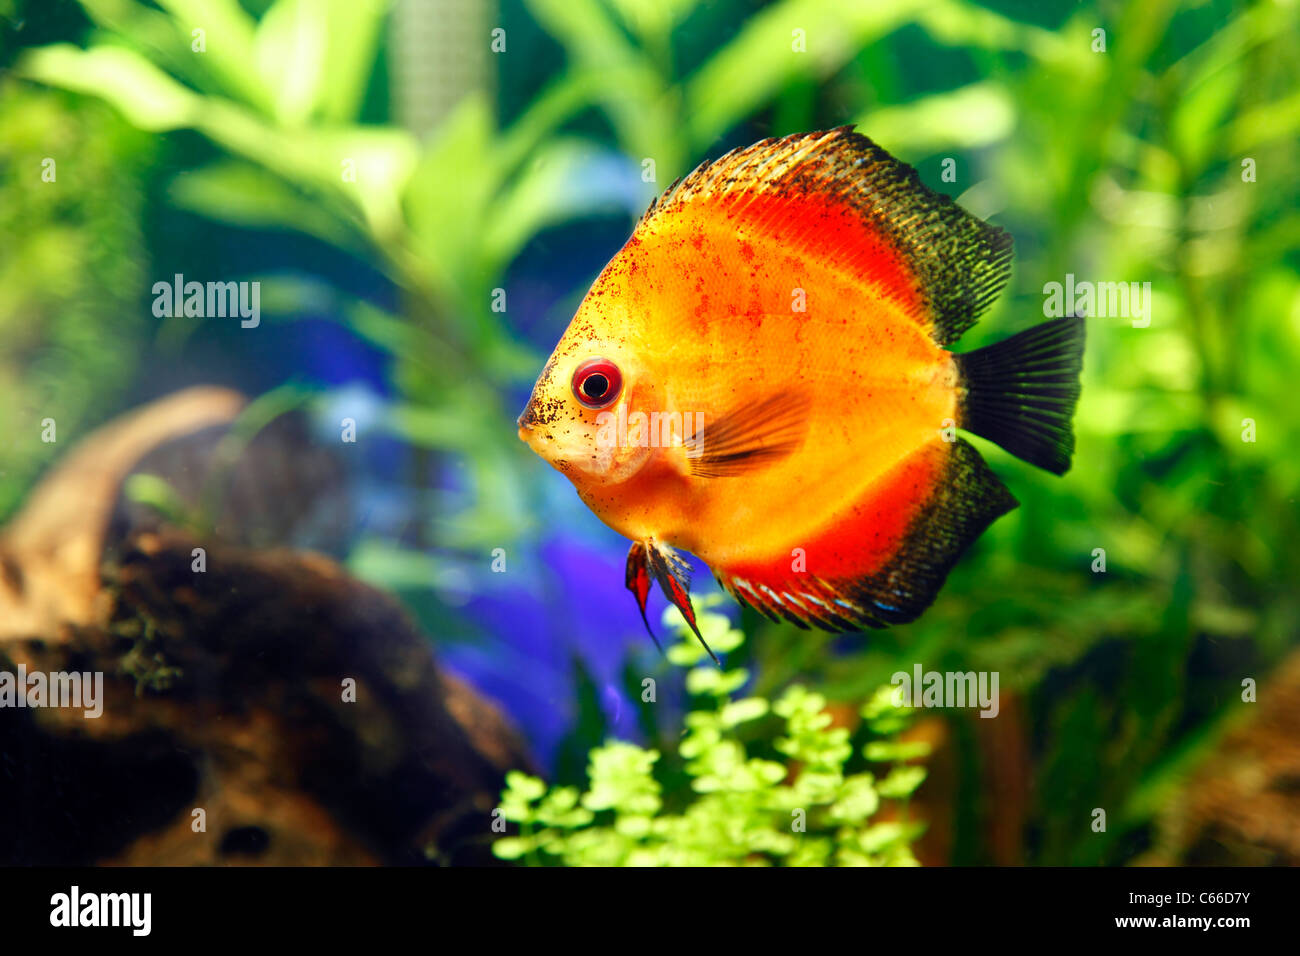 Fire Red Discus Fish Stock Photo - Alamy